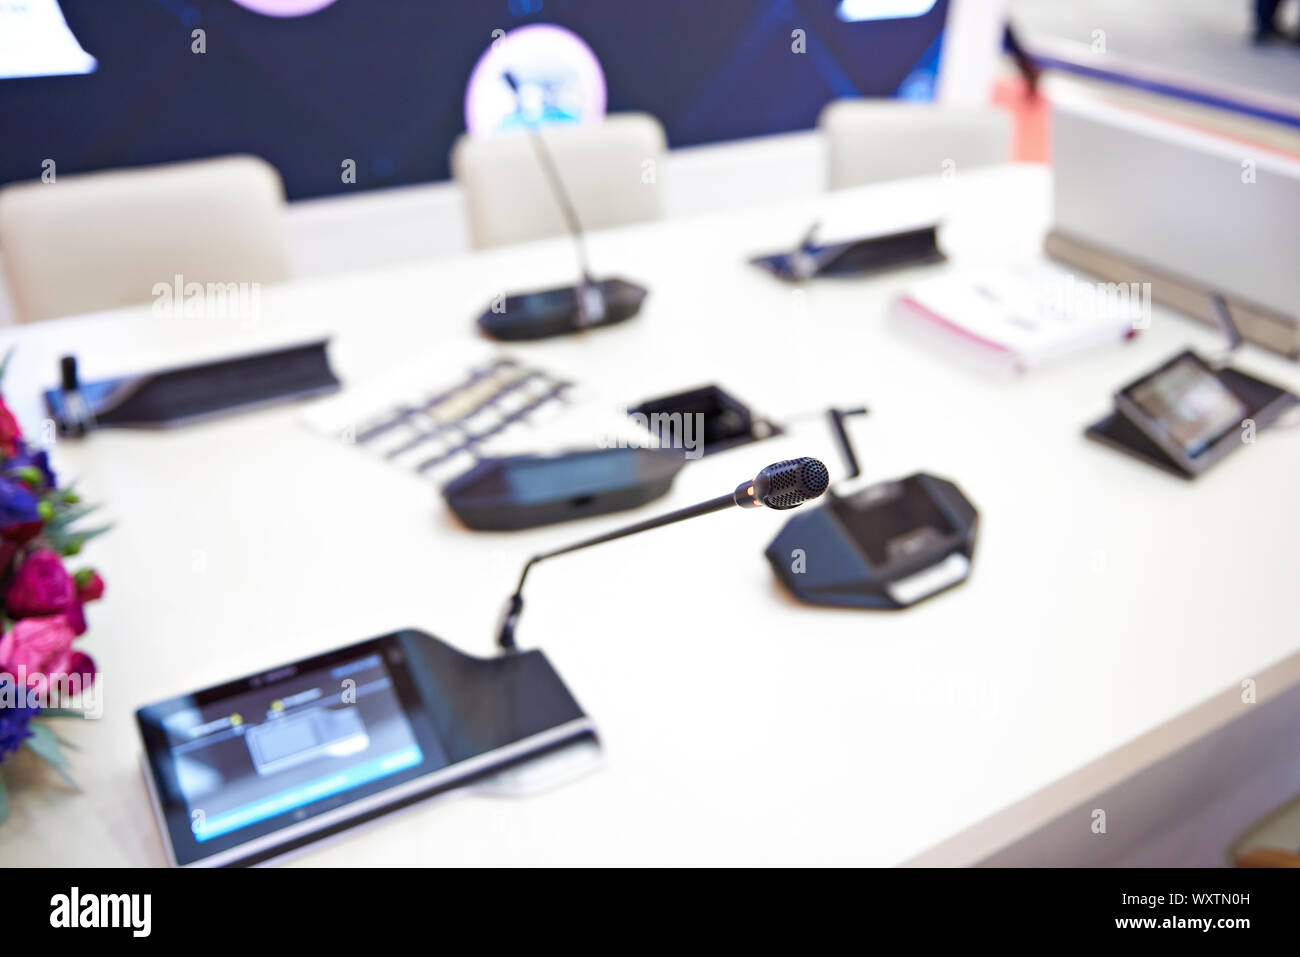 Modern communication equipment for conferences and business meeting Stock Photo